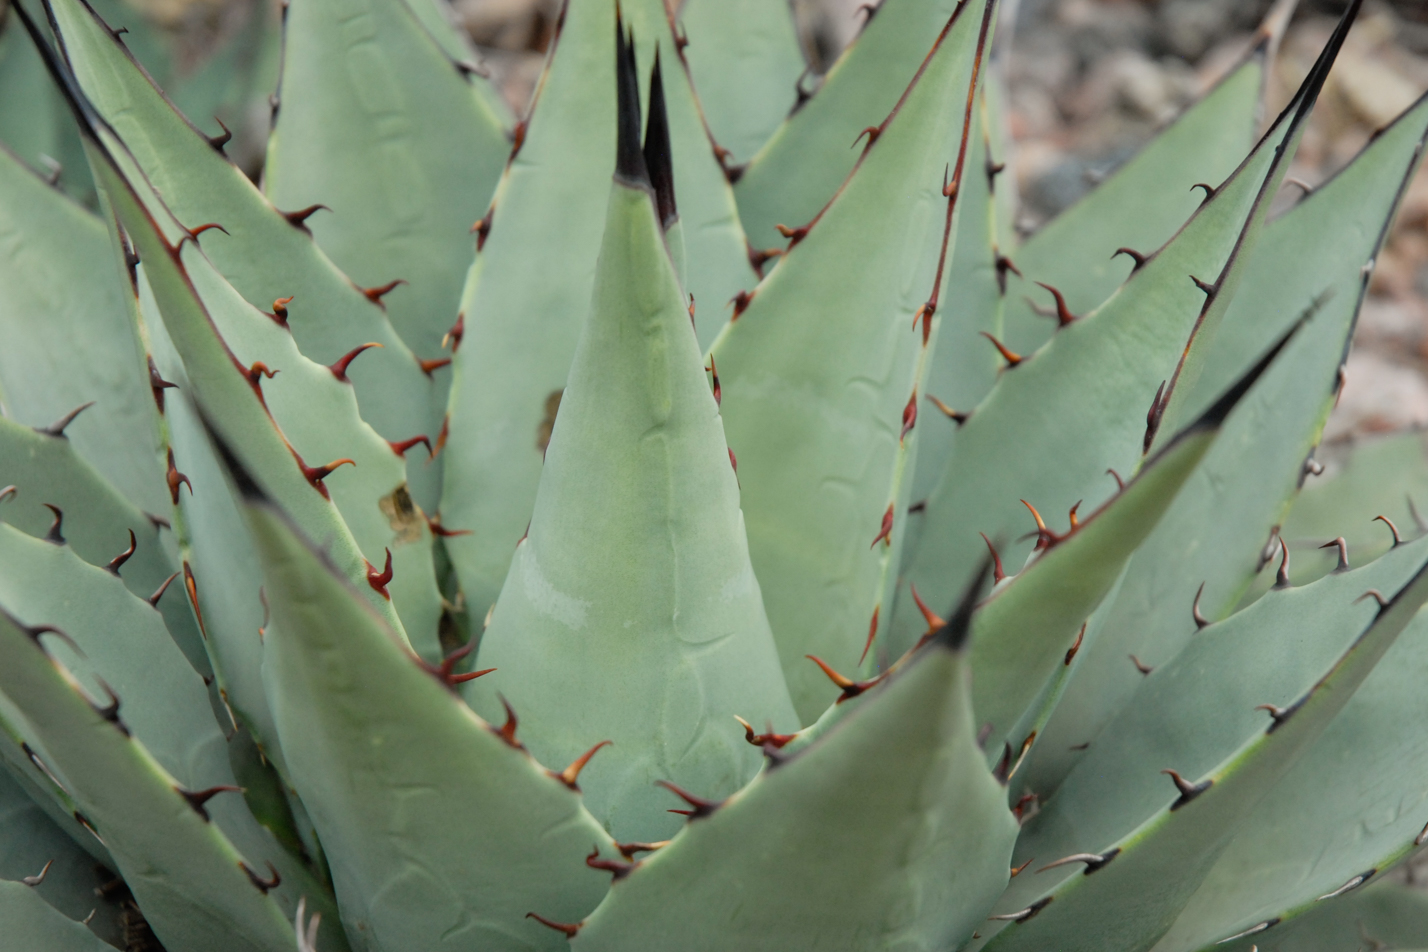 Colorado Springs Utilities Xeriscaping - Parry's Agave